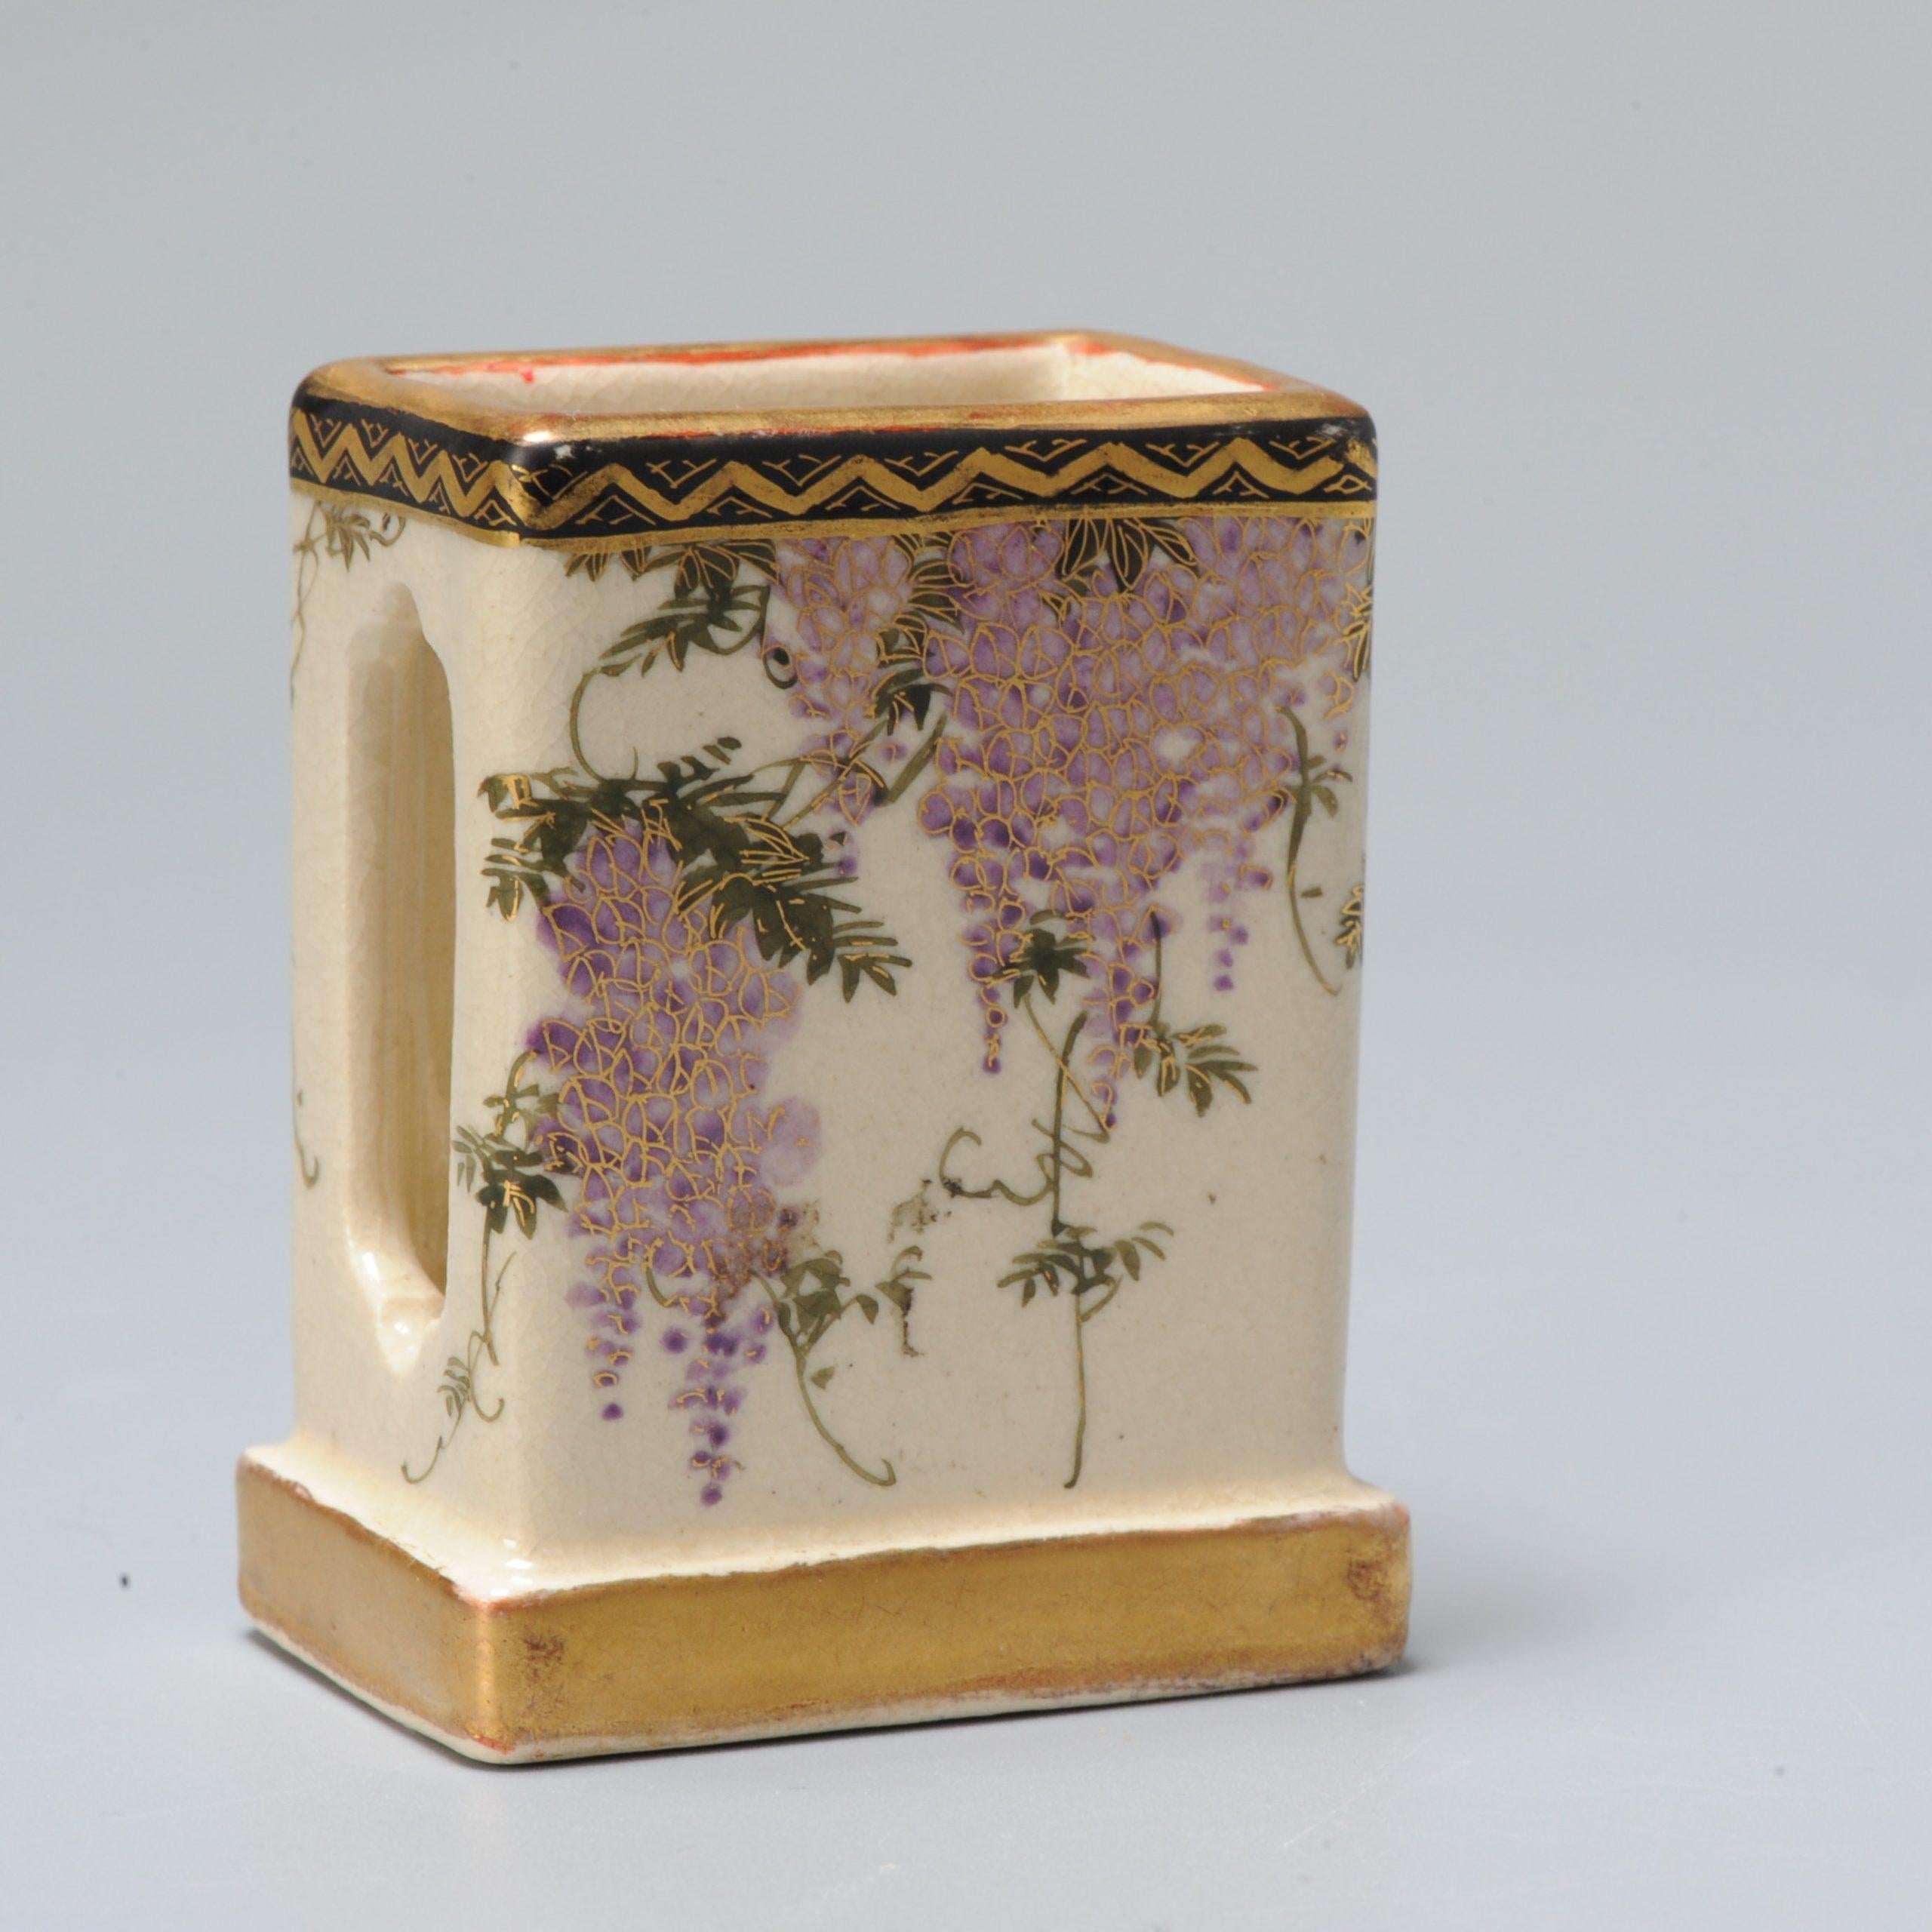 Fabulous and small japanese earthenware Satsuma Matchbox holder of great shape and scene.

The idea is to put the matchbox in it and then inside bit pushes open the matchbox and you strike the matchstick on the side.

Marked: Yasuda

Additional